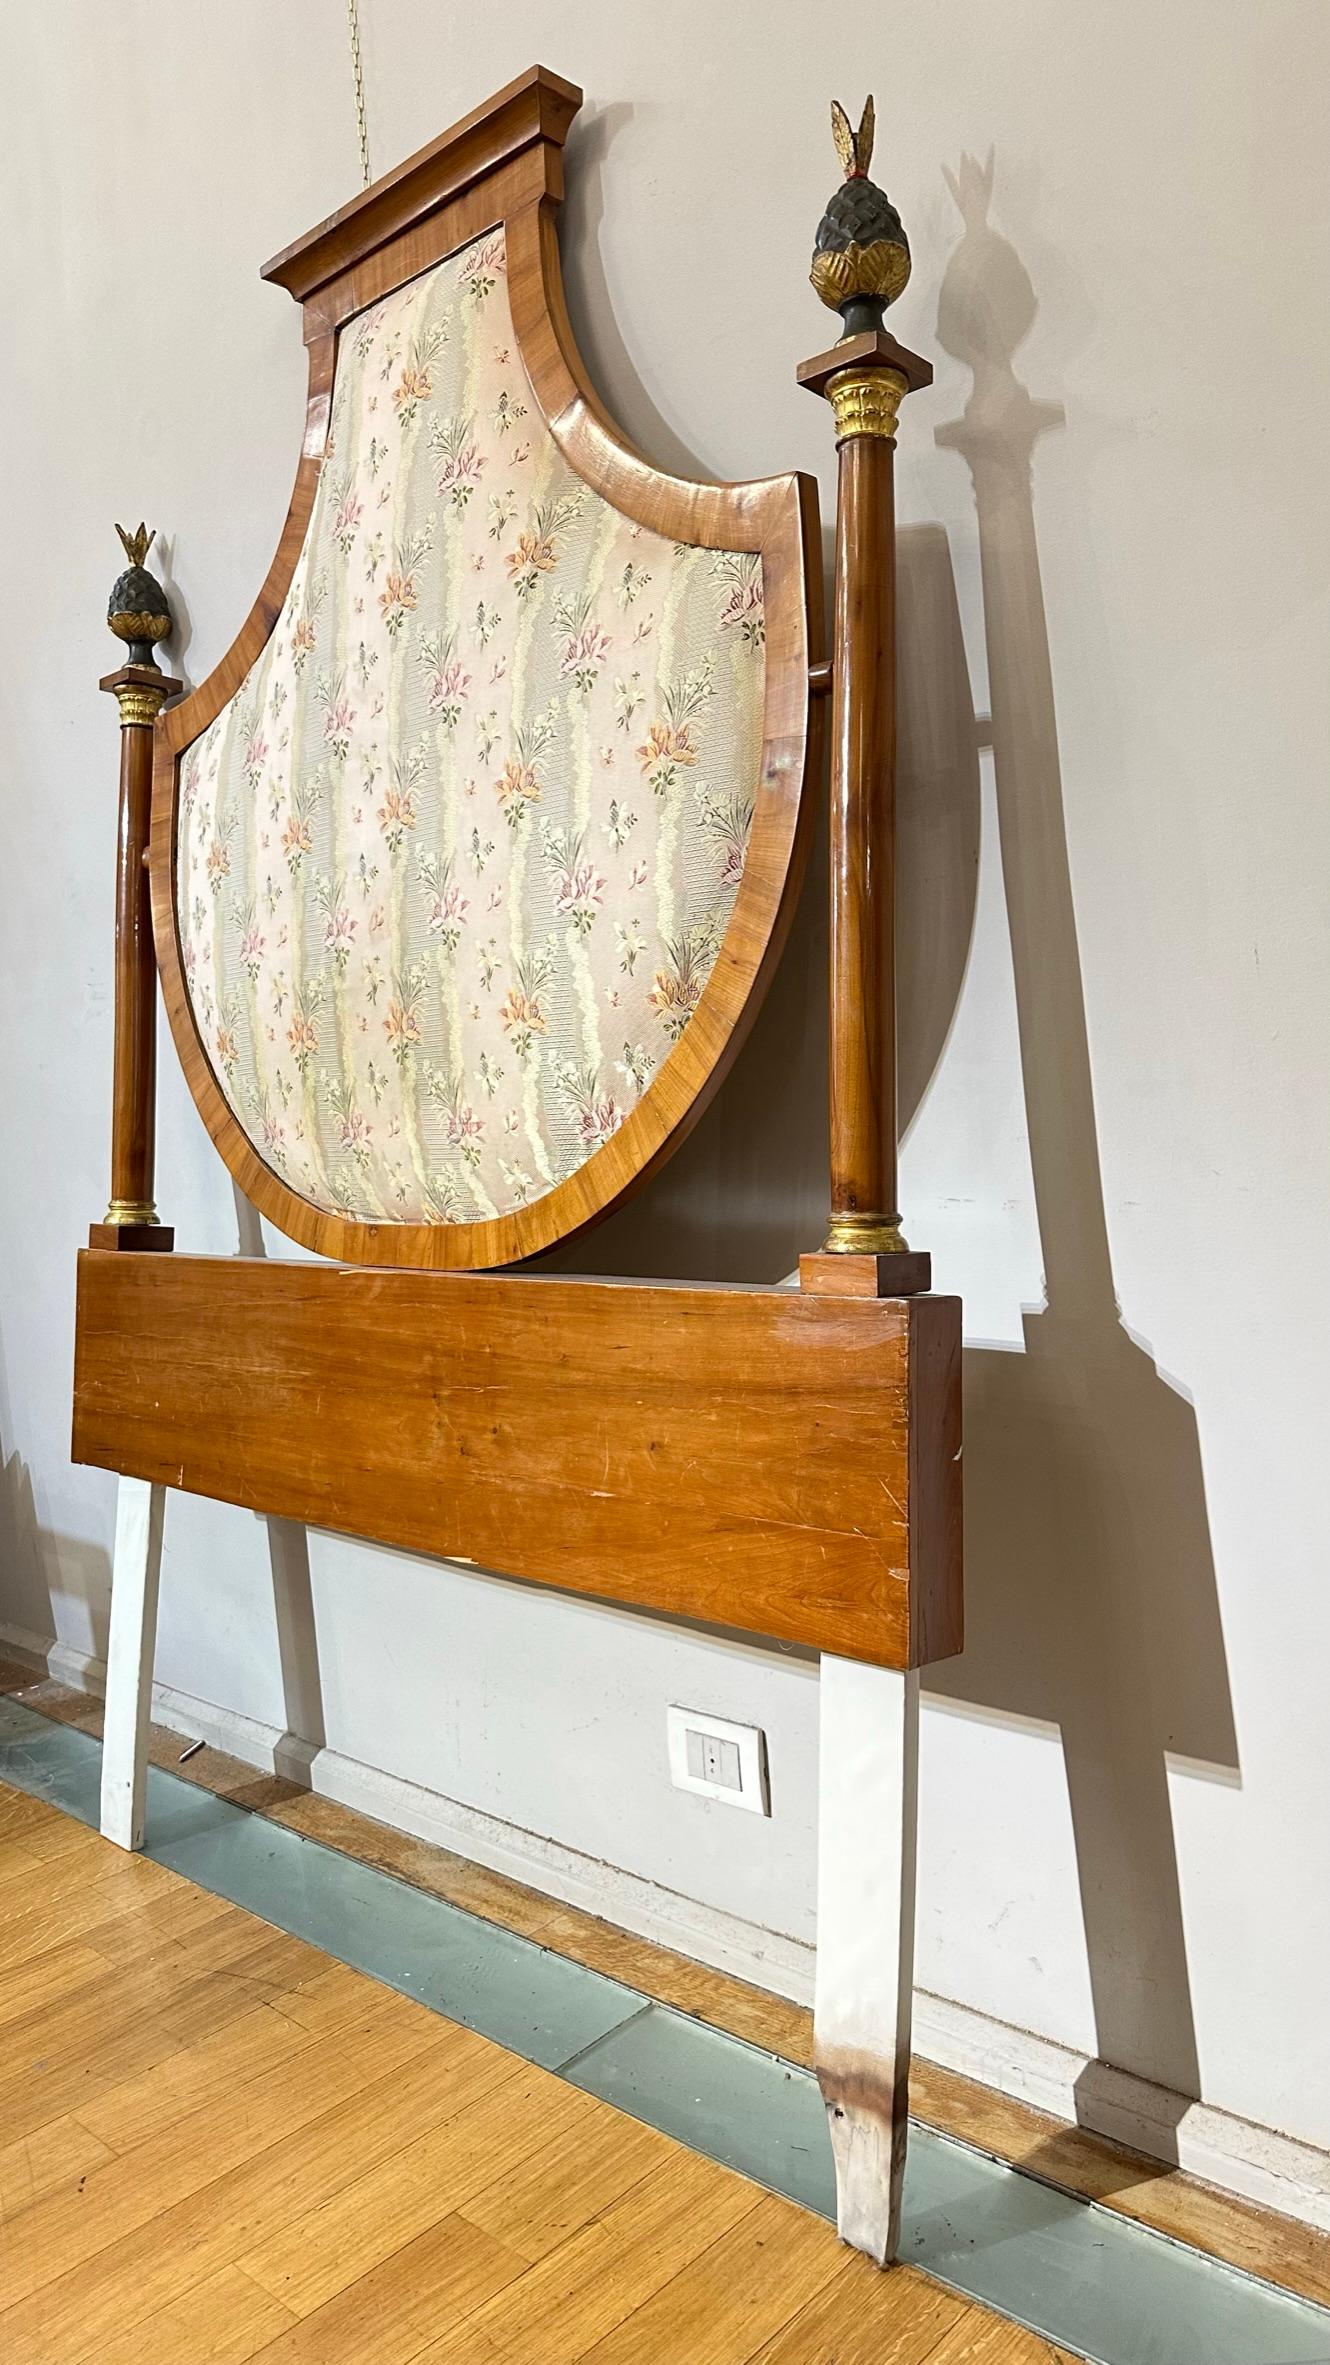 EARLY 19th CENTURY EMPIRE PERIOD BED HEADBOARD  For Sale 3